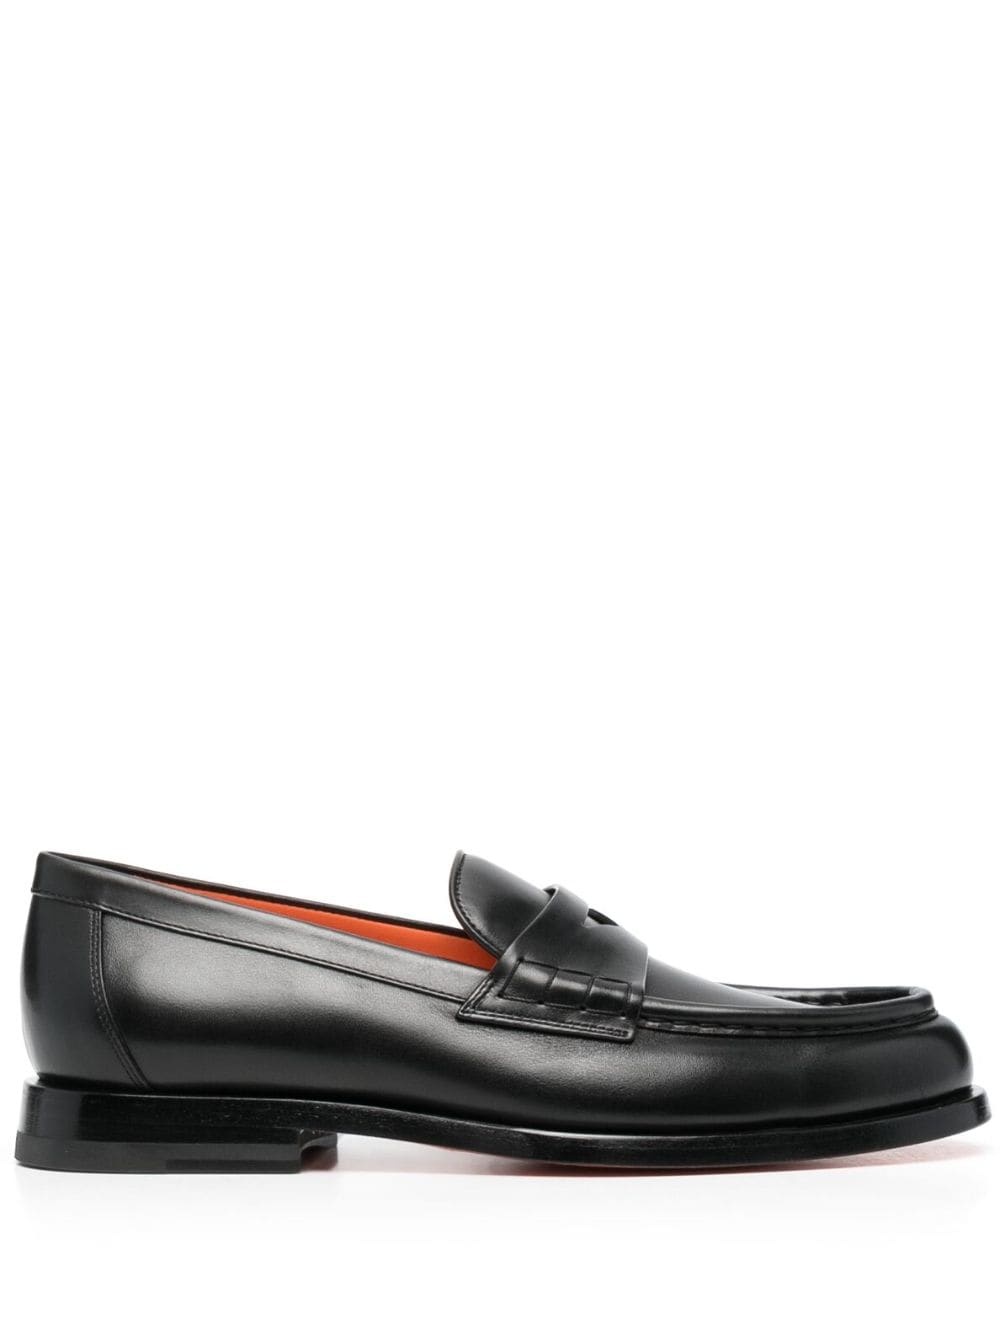 flat leather loafers - 1